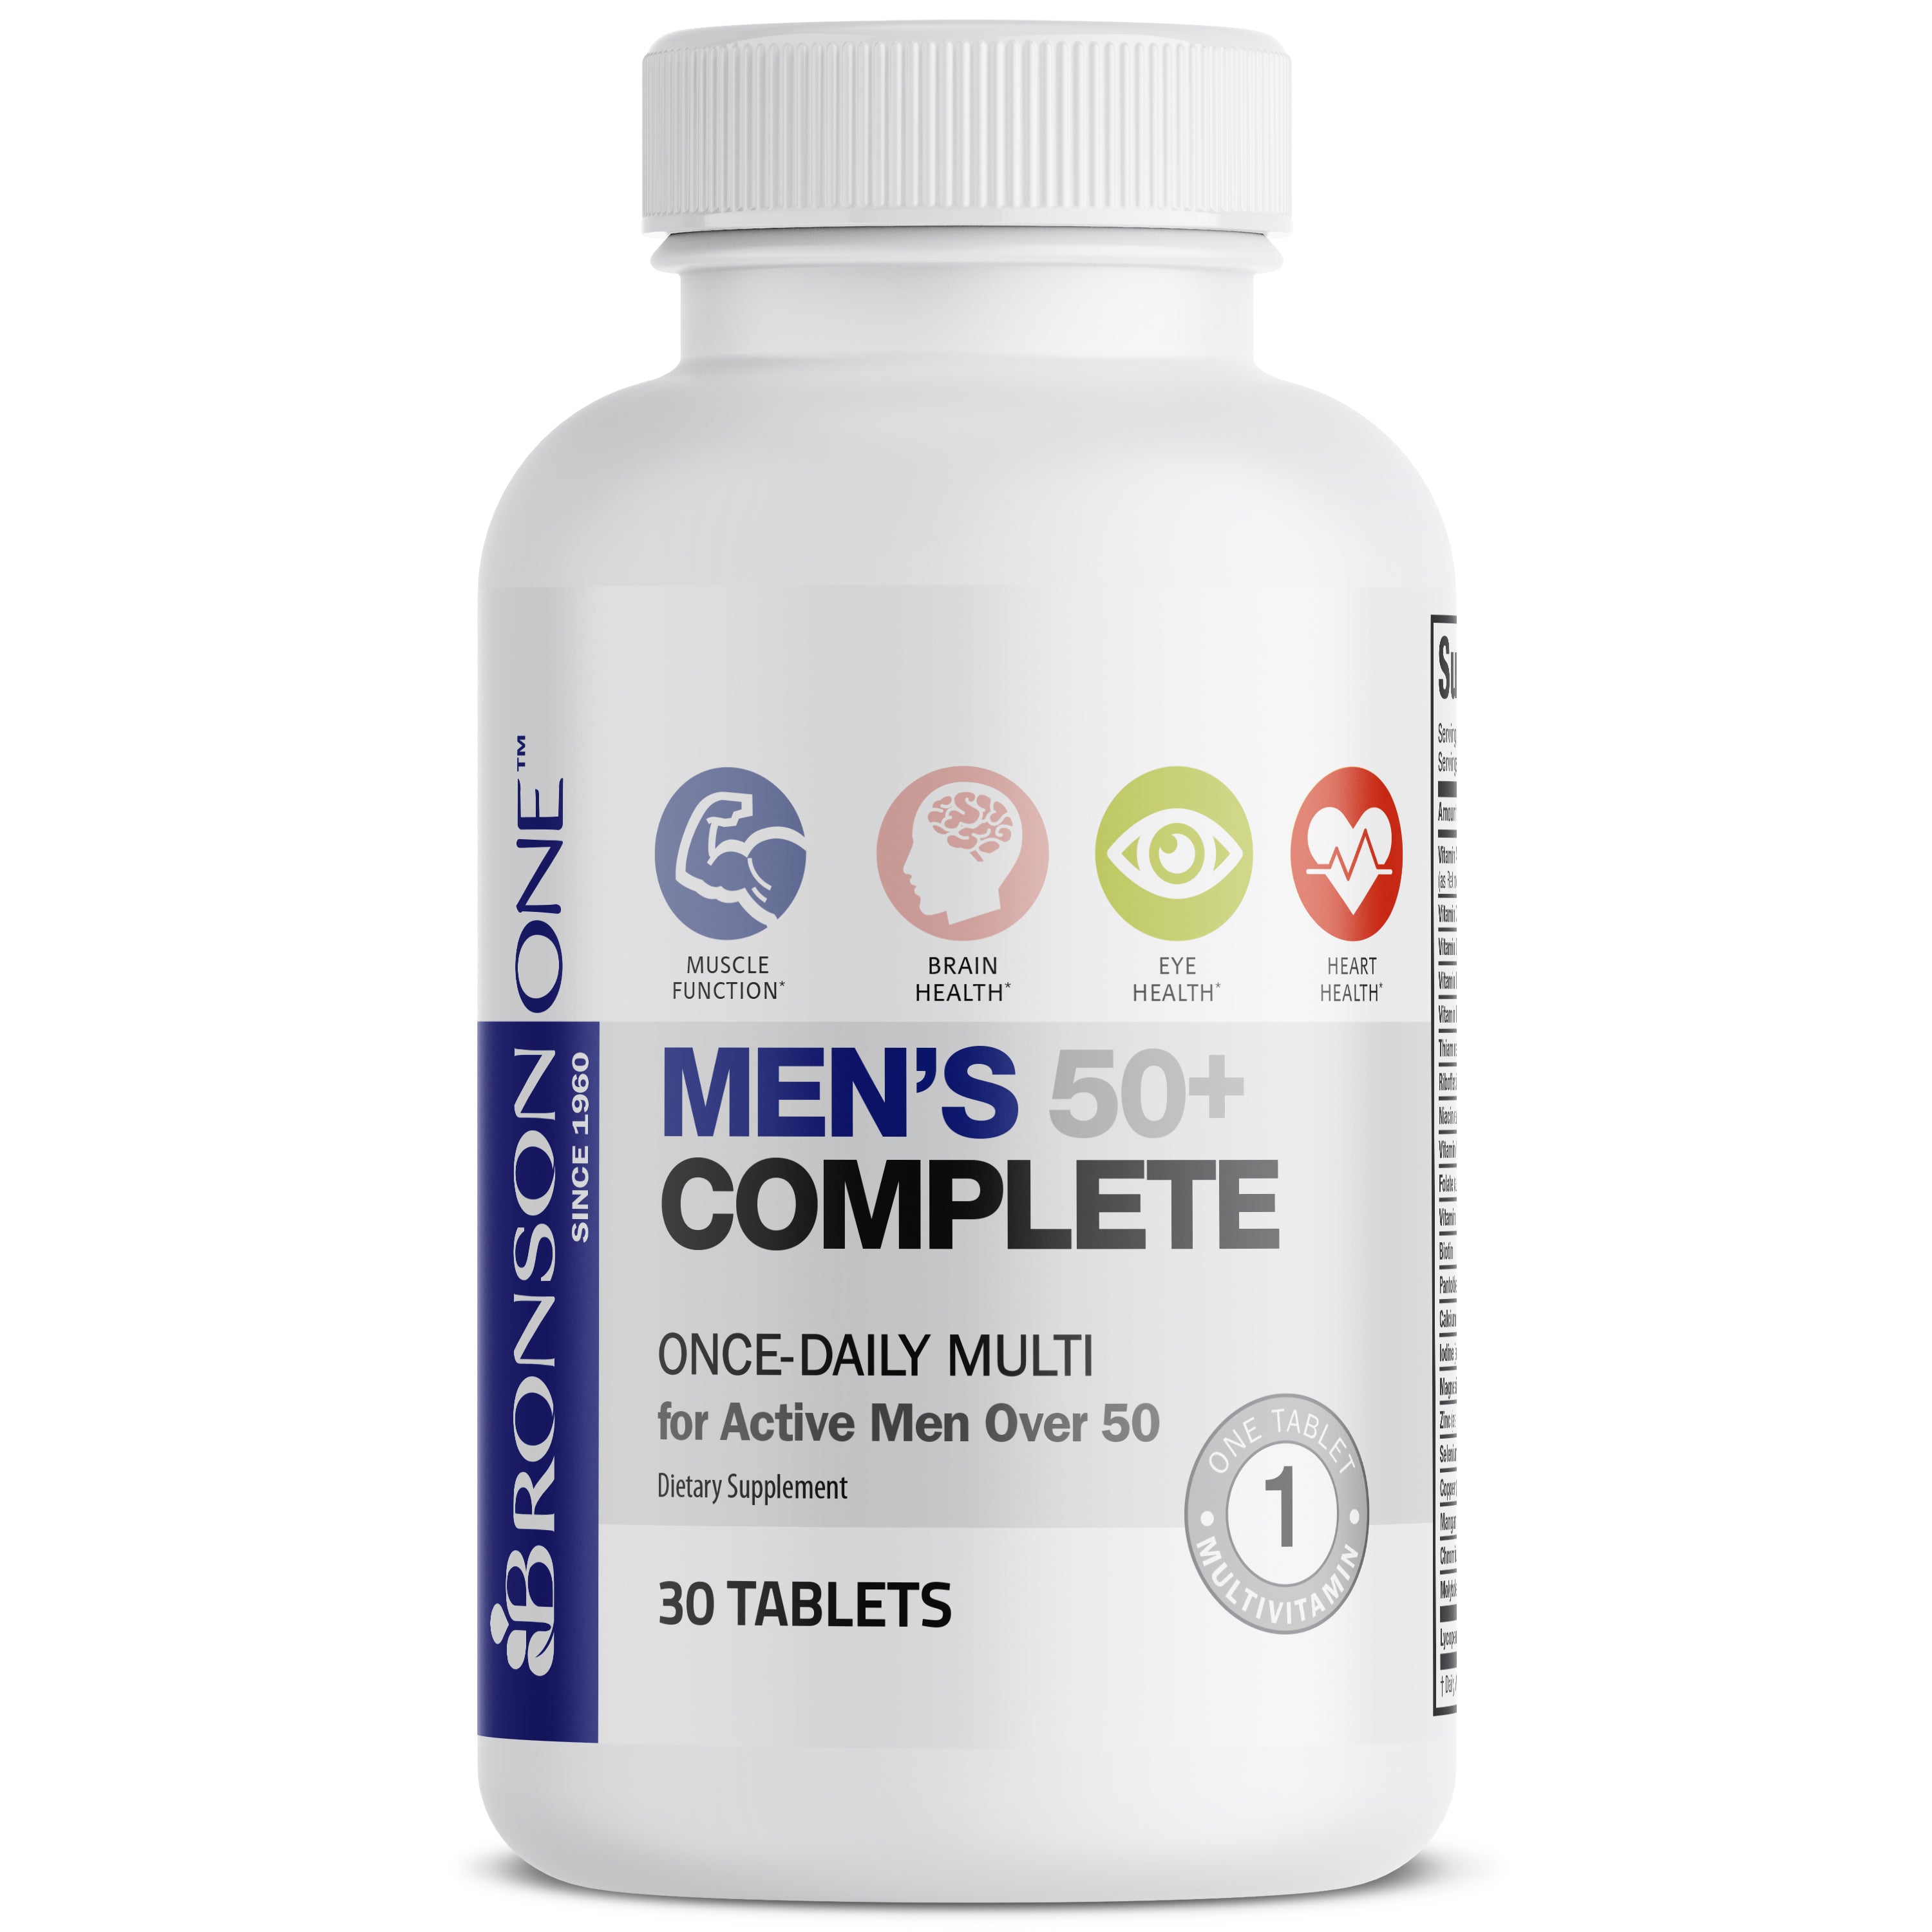 Bronson ONE™ Men's 50+ Complete Once-Daily Multivitamin view 3 of 6